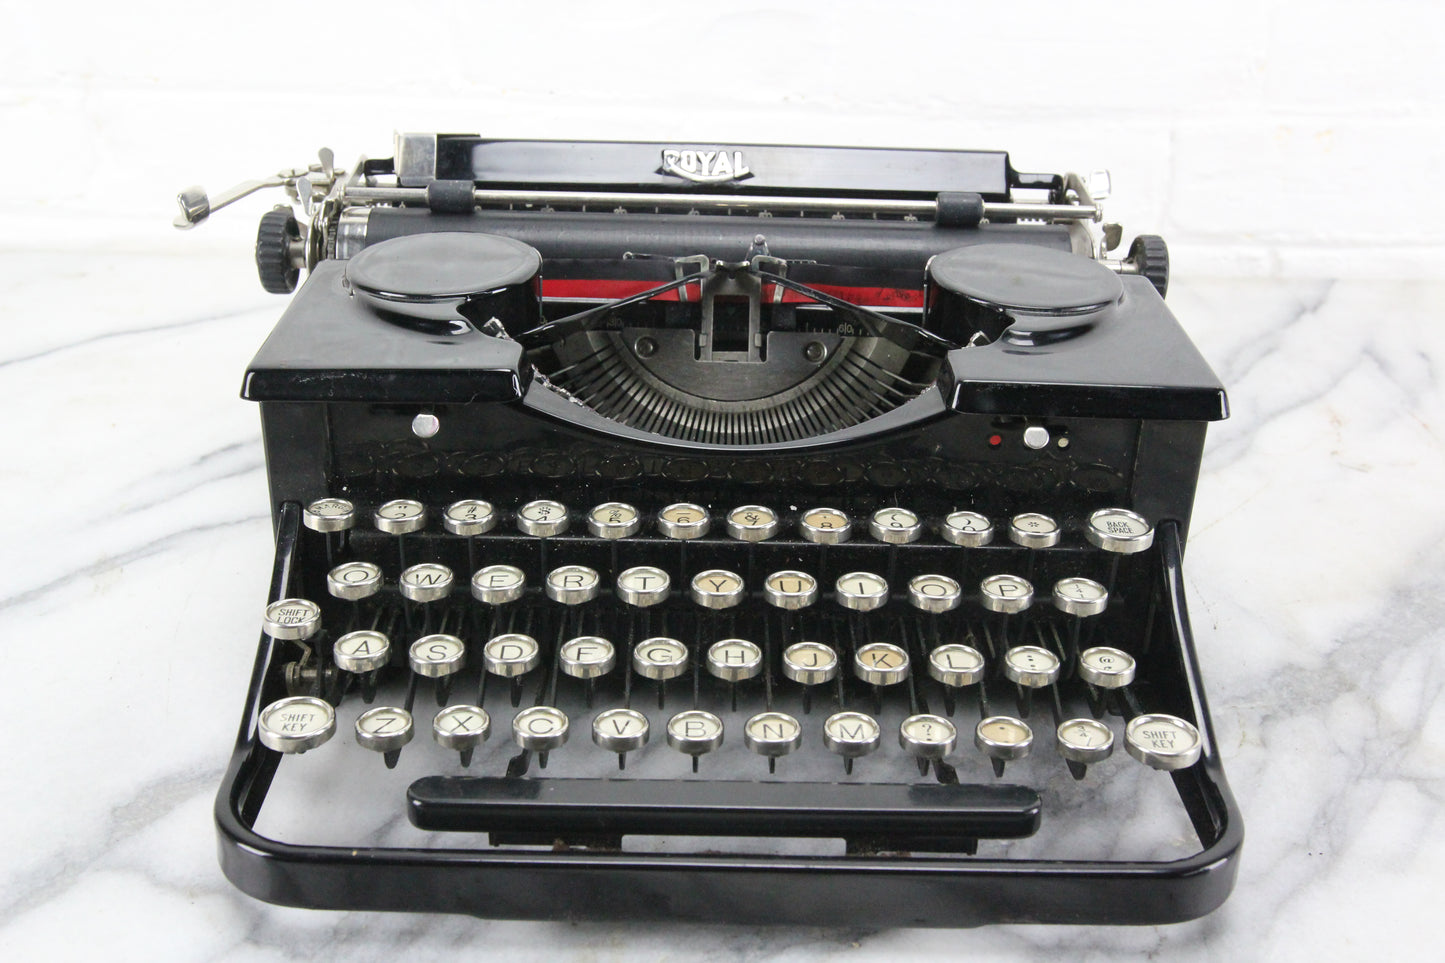 Royal Model "P" Portable Typewriter with Case, Made in USA, 1931